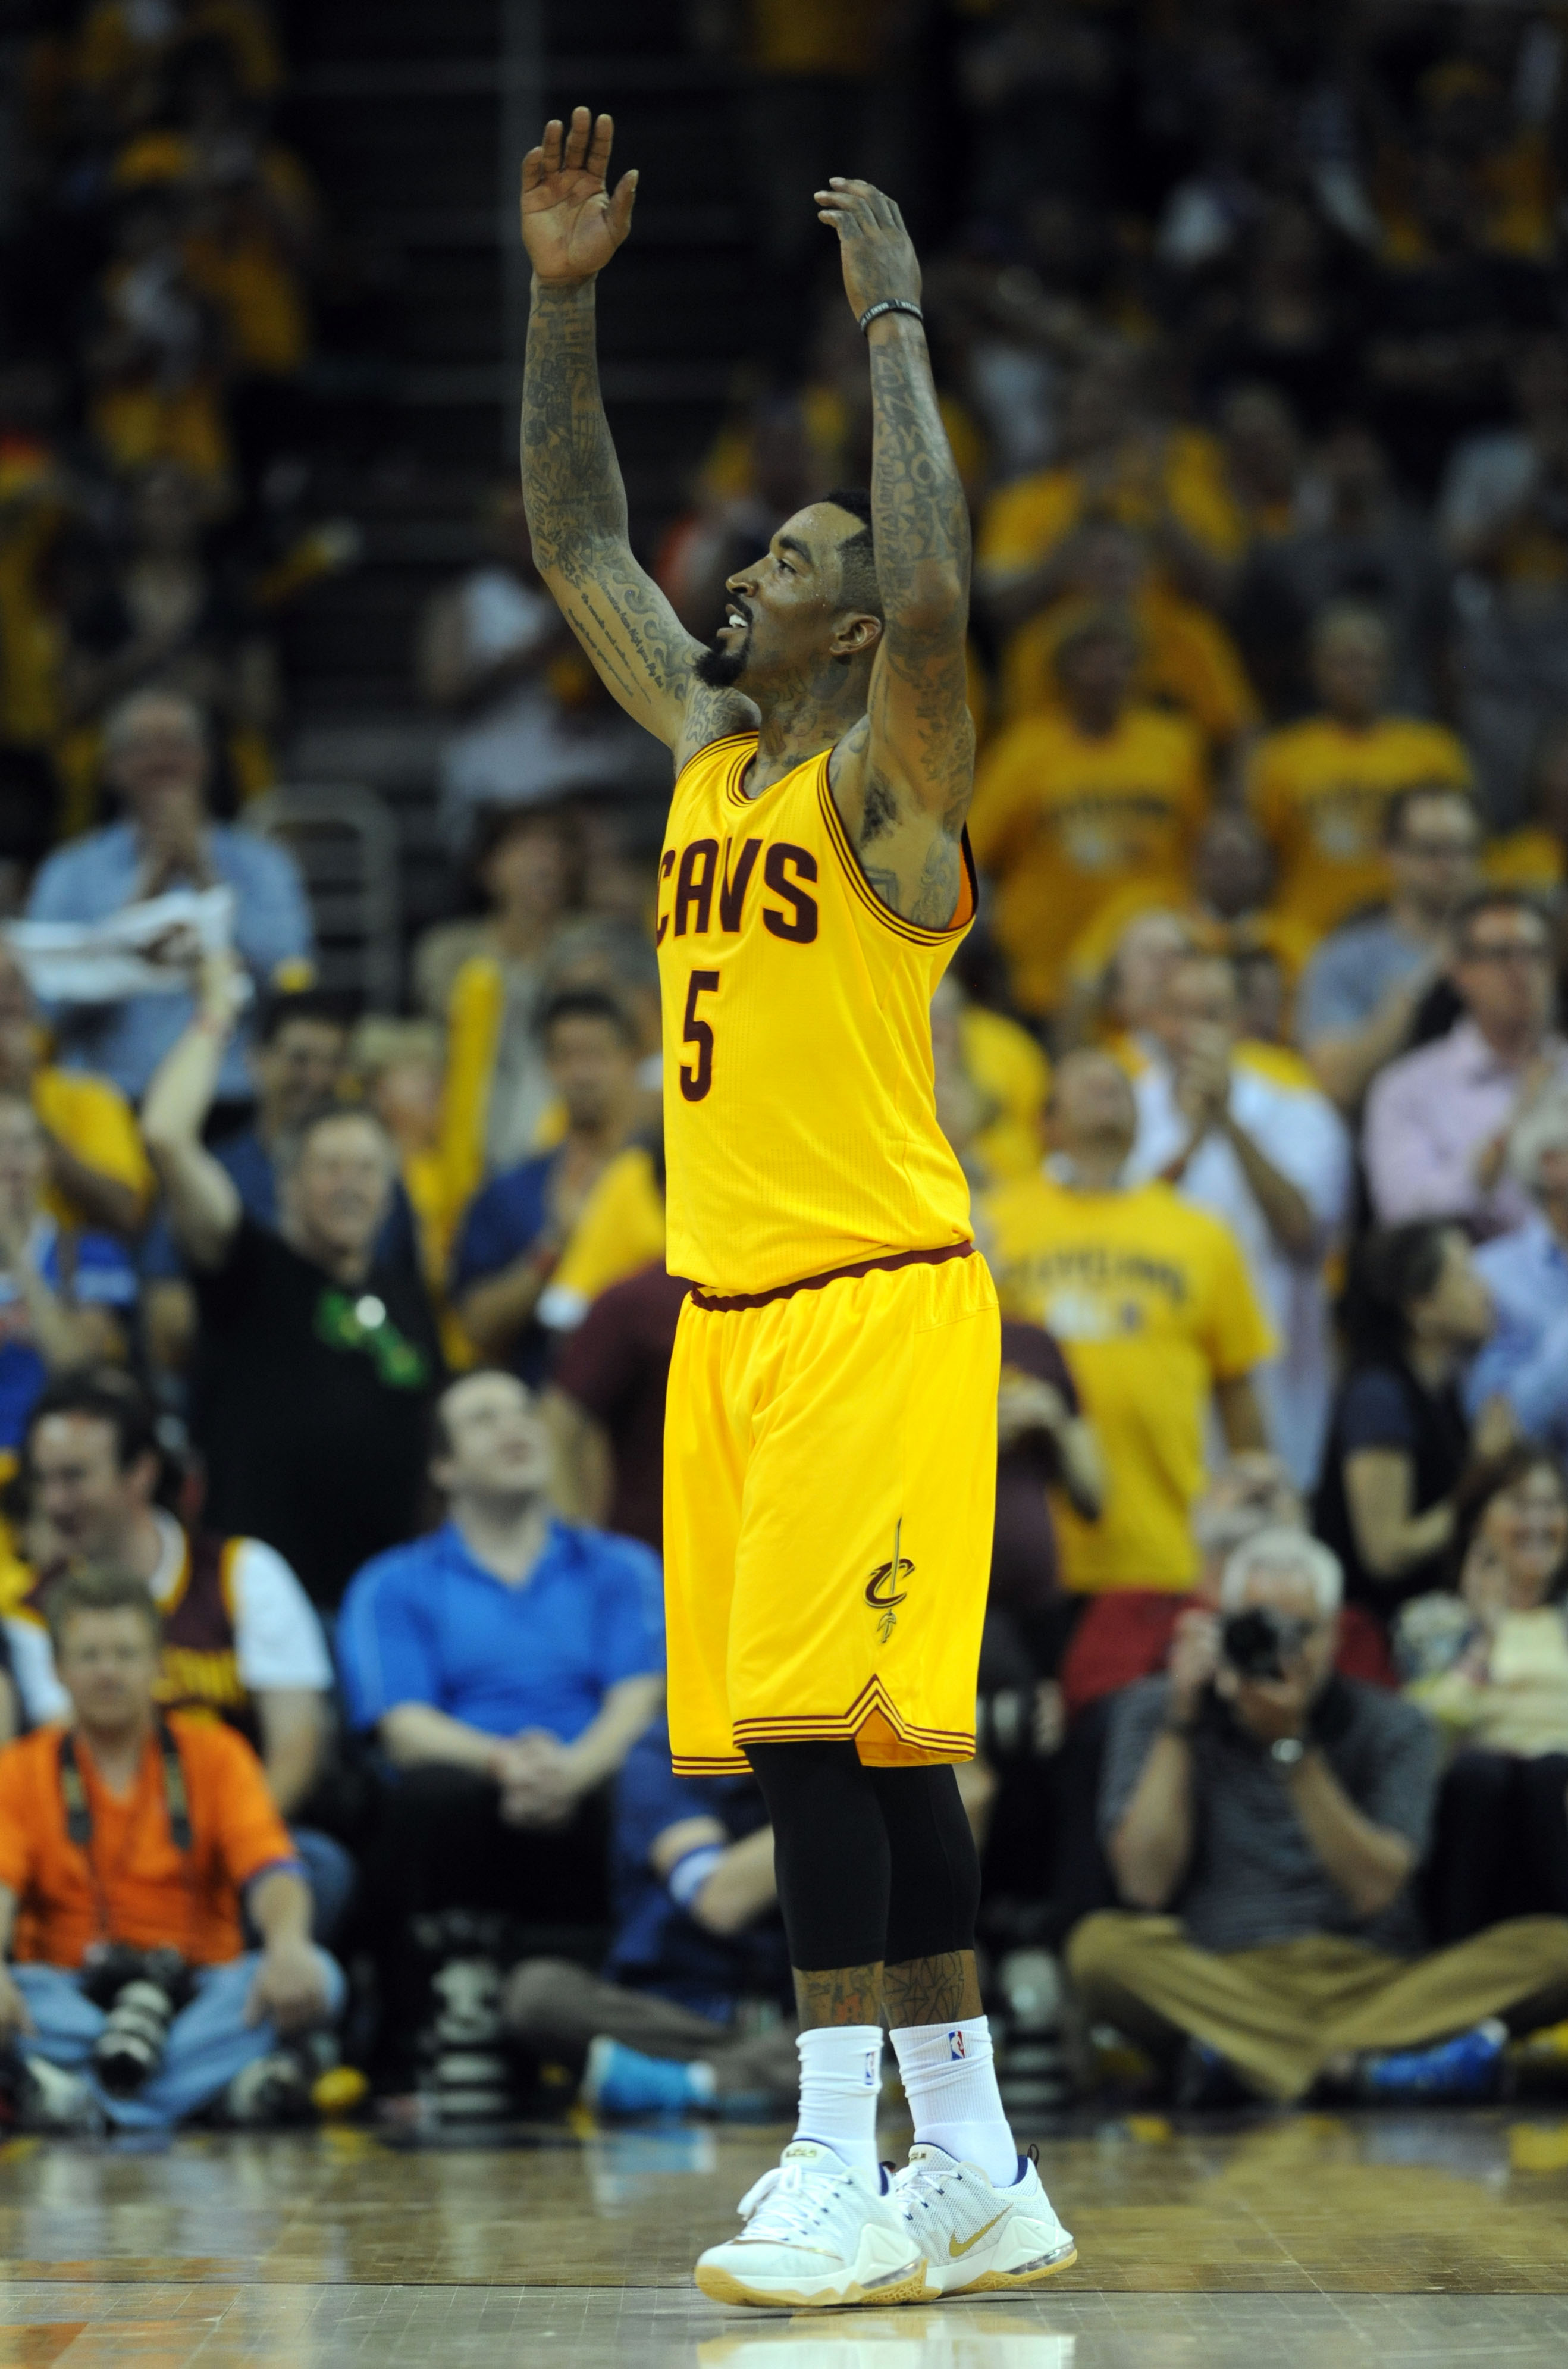 May 26, 2015; Cleveland, OH, USA; Cleveland Cavaliers guard J.R. Smith (5) reacts during the fourth quarter against the Atlanta Hawks in game four of the Eastern Conference Finals of the NBA Playoffs at Quicken Loans Arena. Mandatory Credit: Ken Blaze-USA TODAY Sports